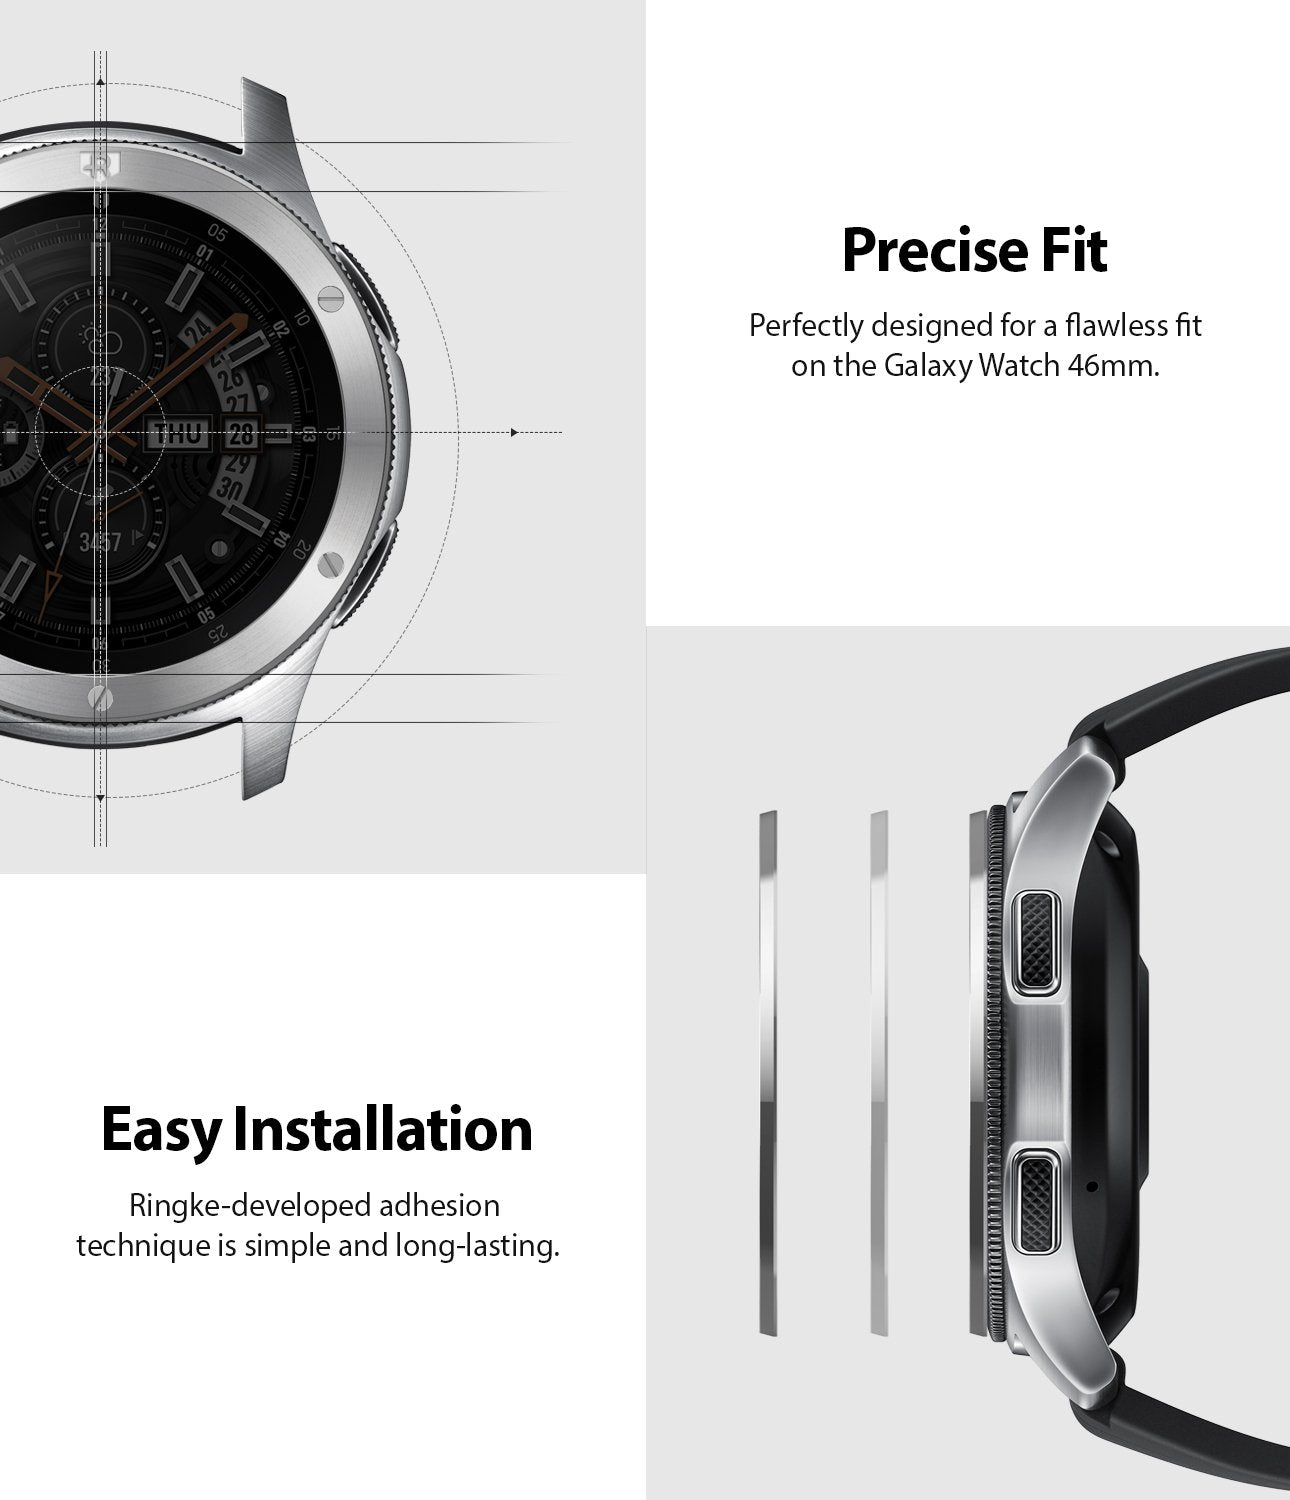 perfectly designed for a flawless fit on the galaxy watch 46mm, gear s3 frontier and classic allows easy installation with strong 3m adhesive